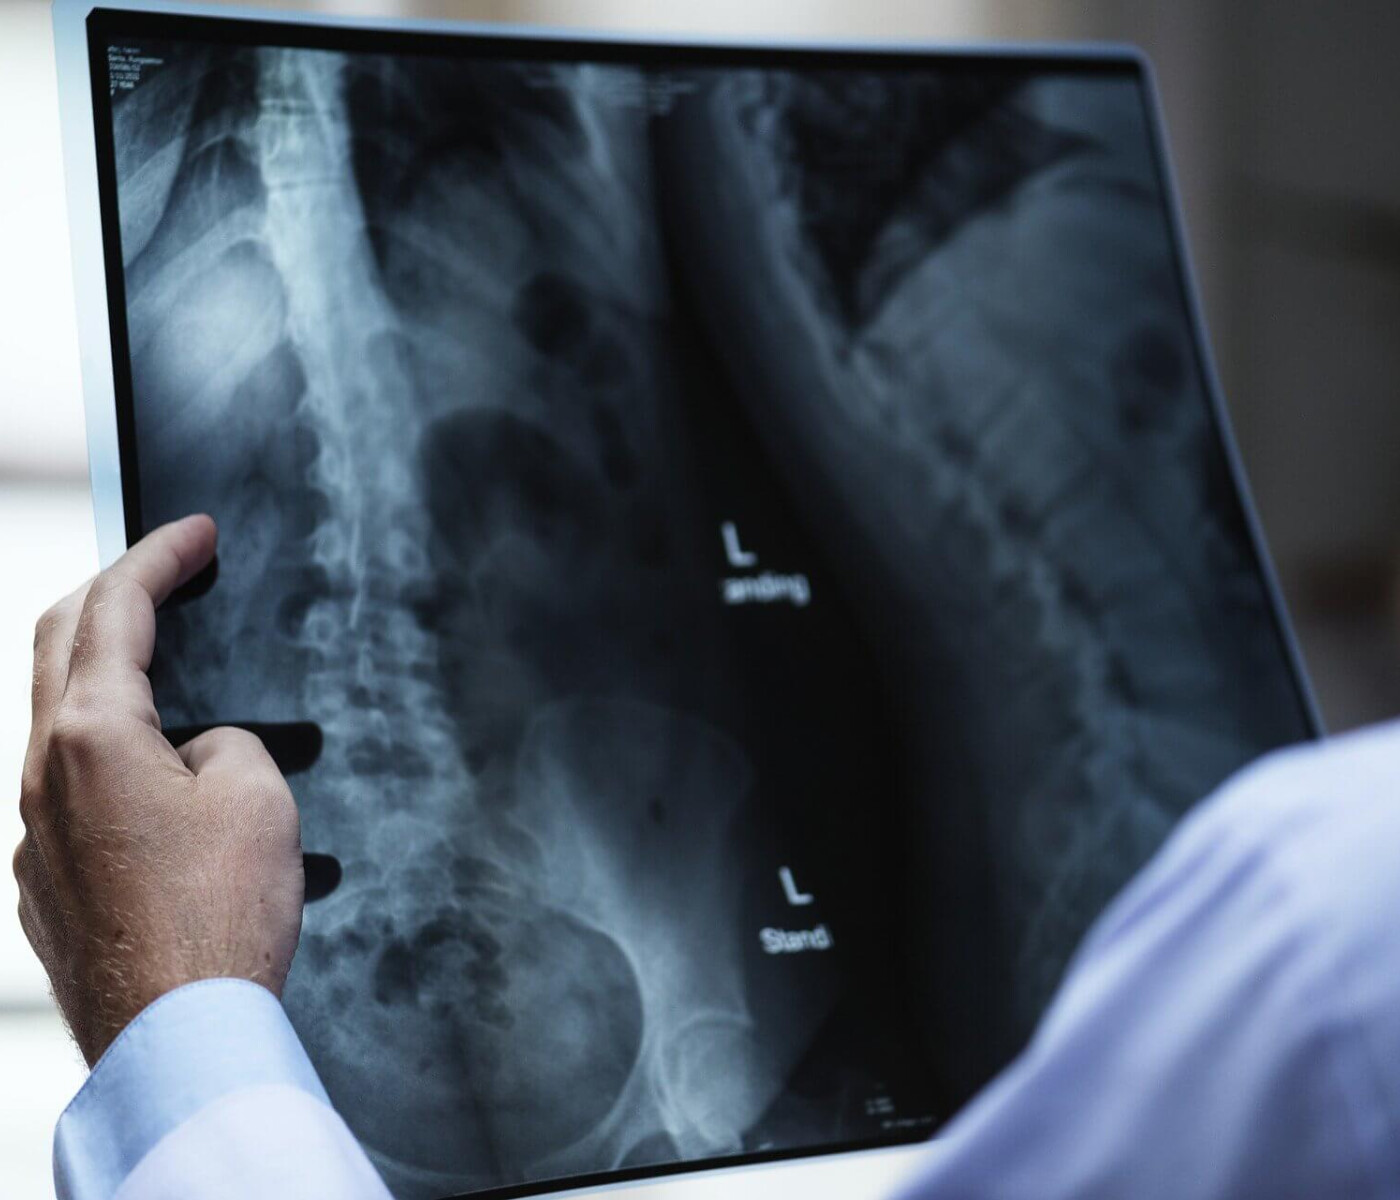 Doctor inspecting X-ray image